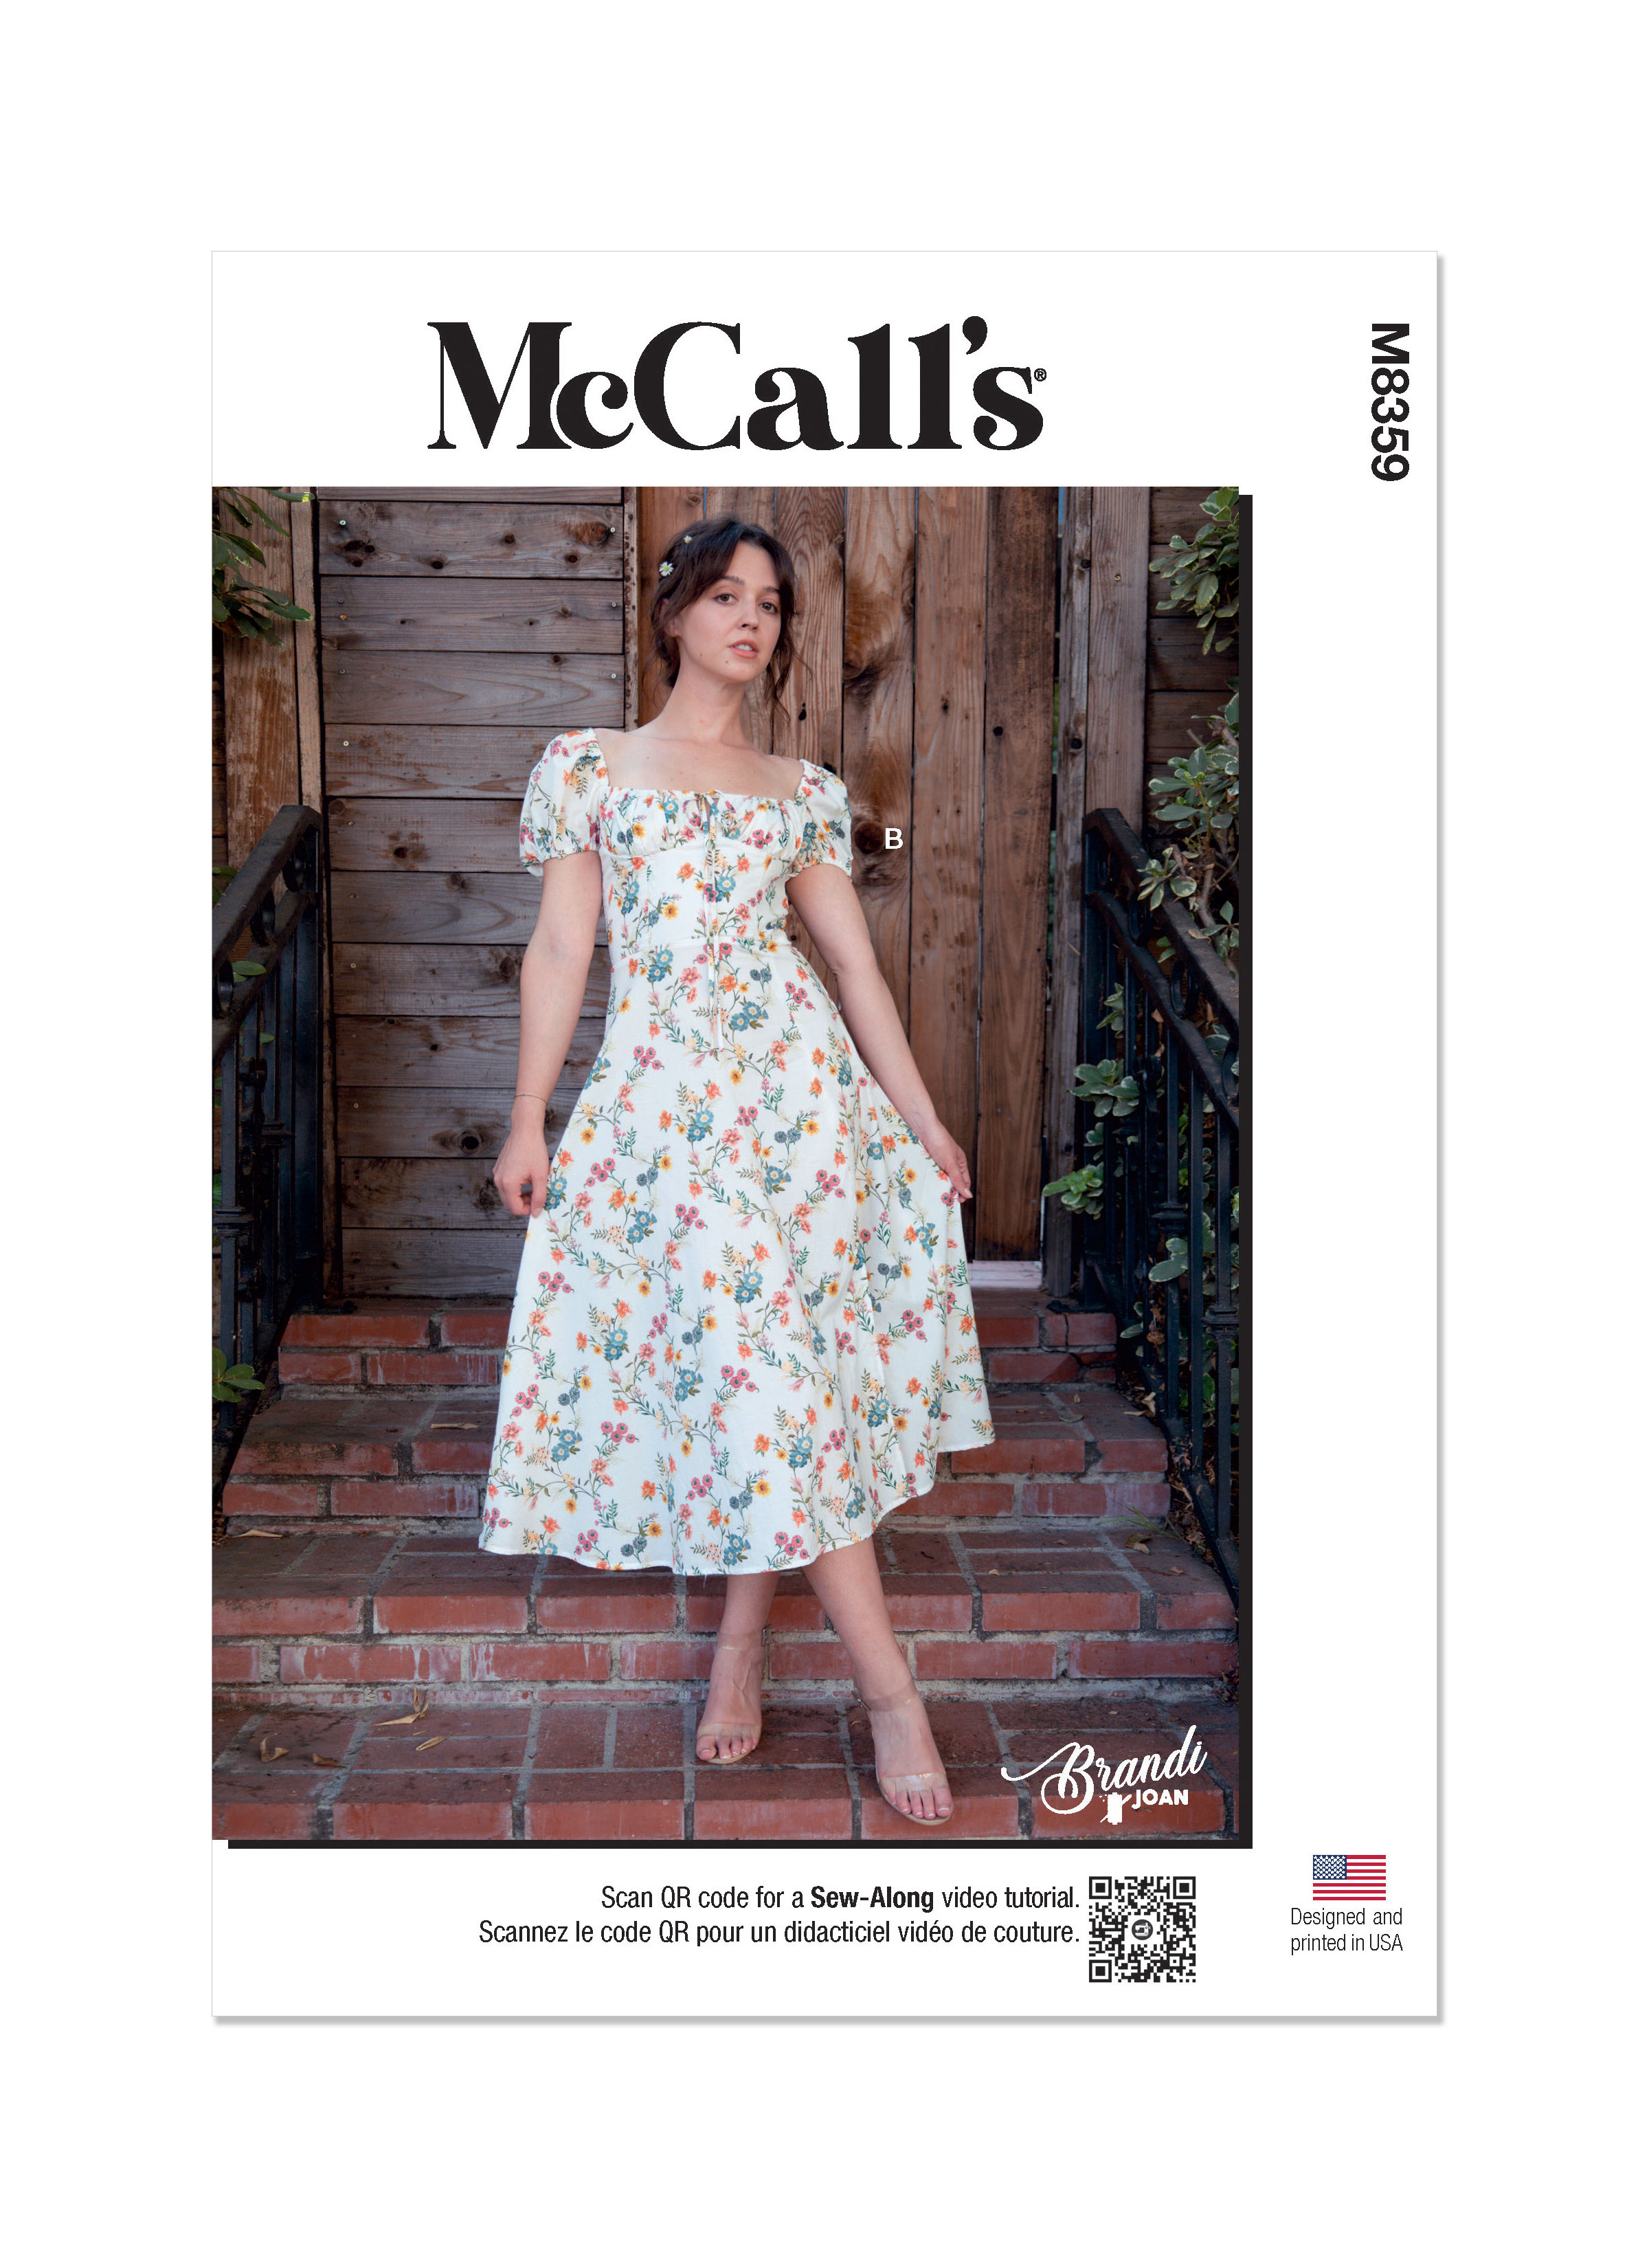 Sew Along with Julie - McCall's 8358 Wrap Dress Sew Along